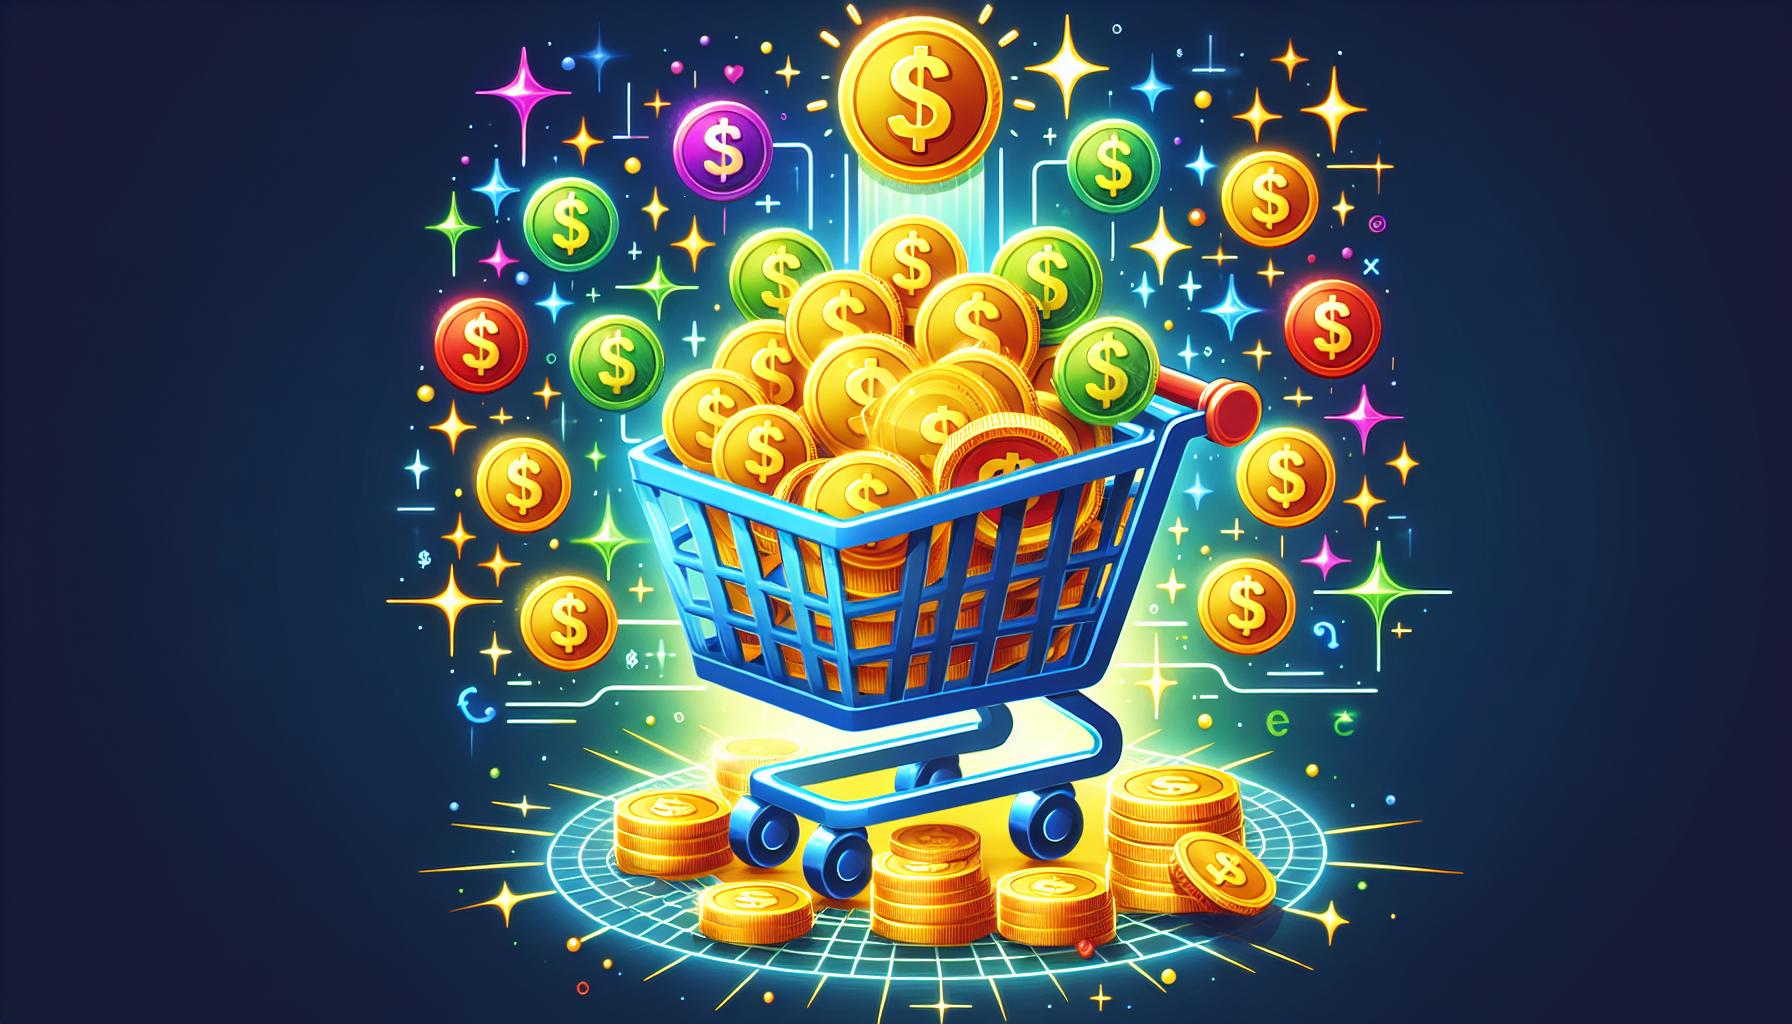 A shopping cart overflowing with gold coins and dollar signs, labeled ThriveCart, with glowing positive symbols around it.